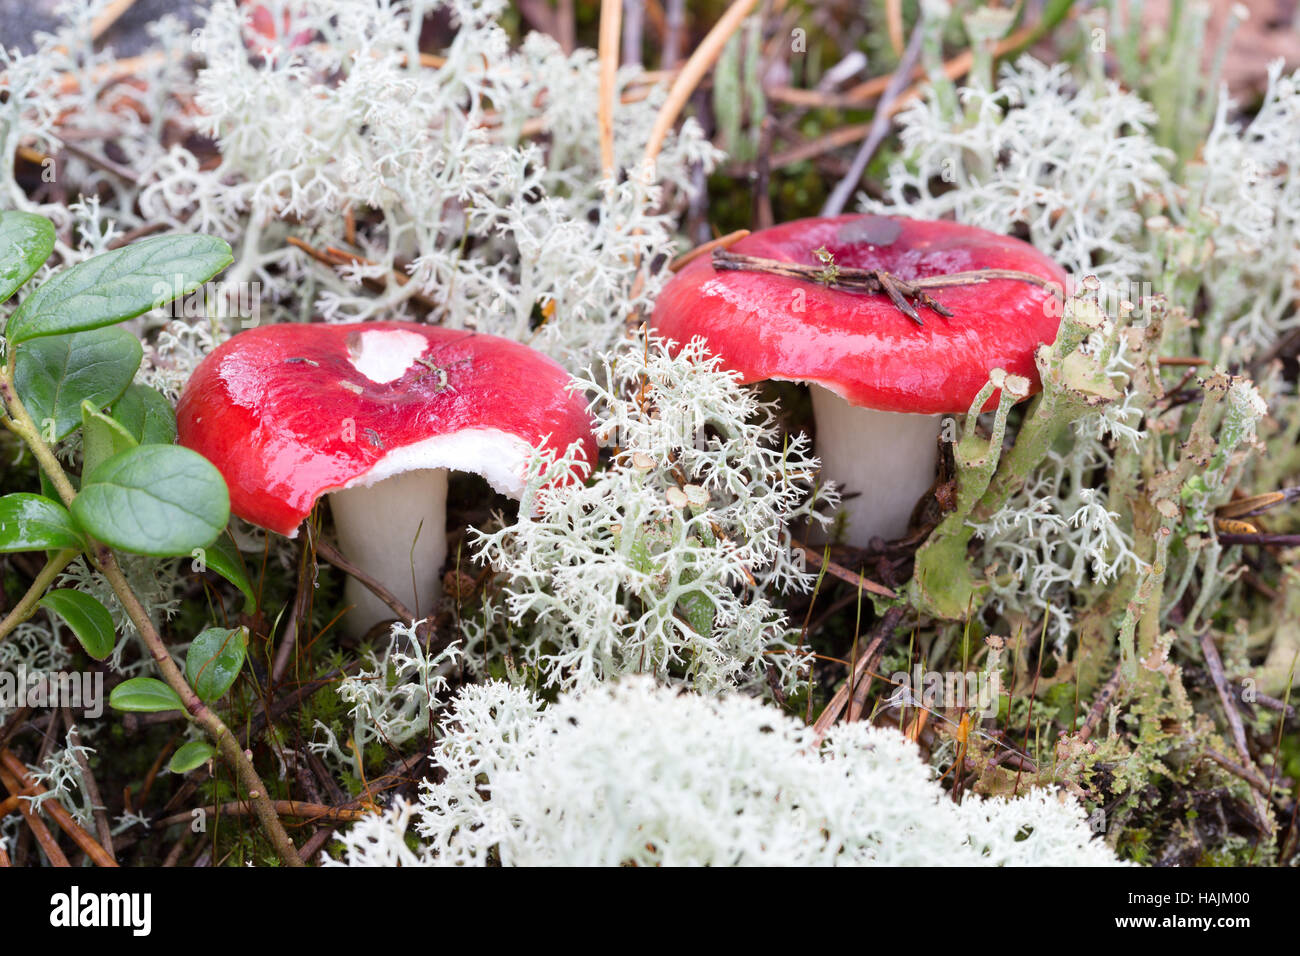 russula mushrooms in the woods, in the moss Stock Photo